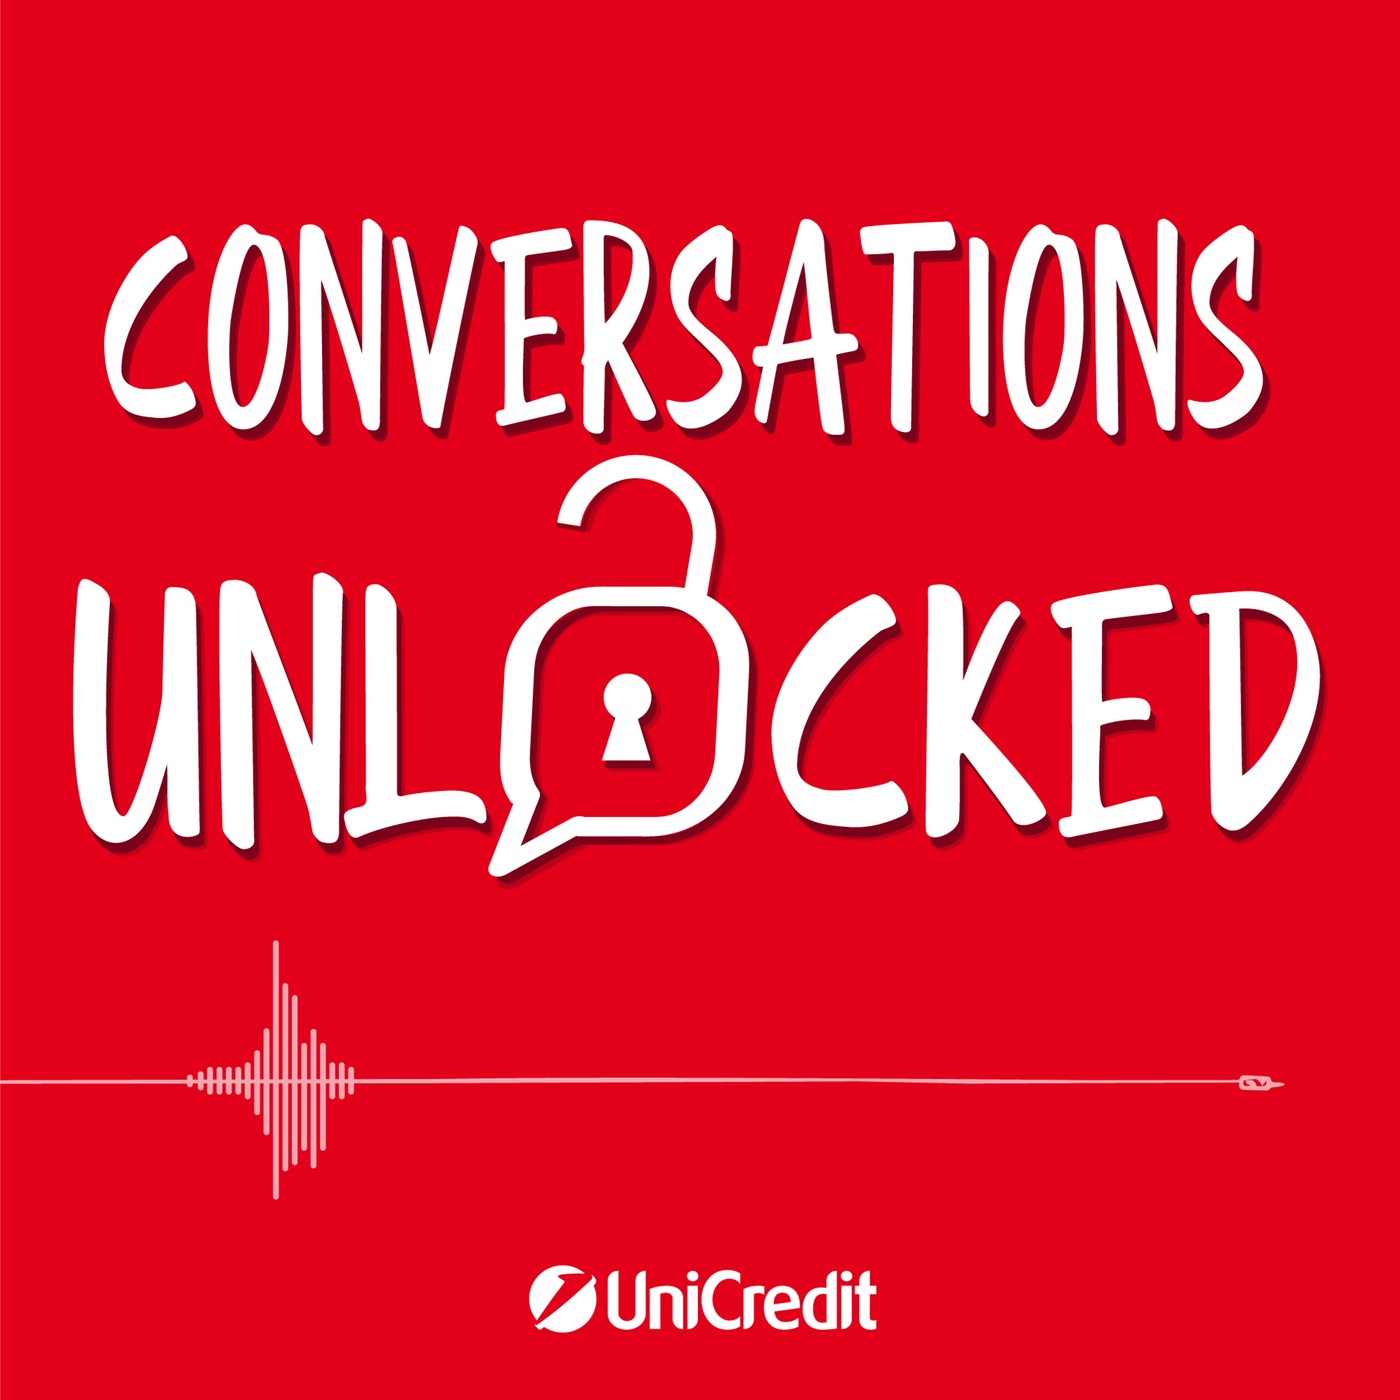 Conversations Unlocked. The UniCredit Podcast | Trailer